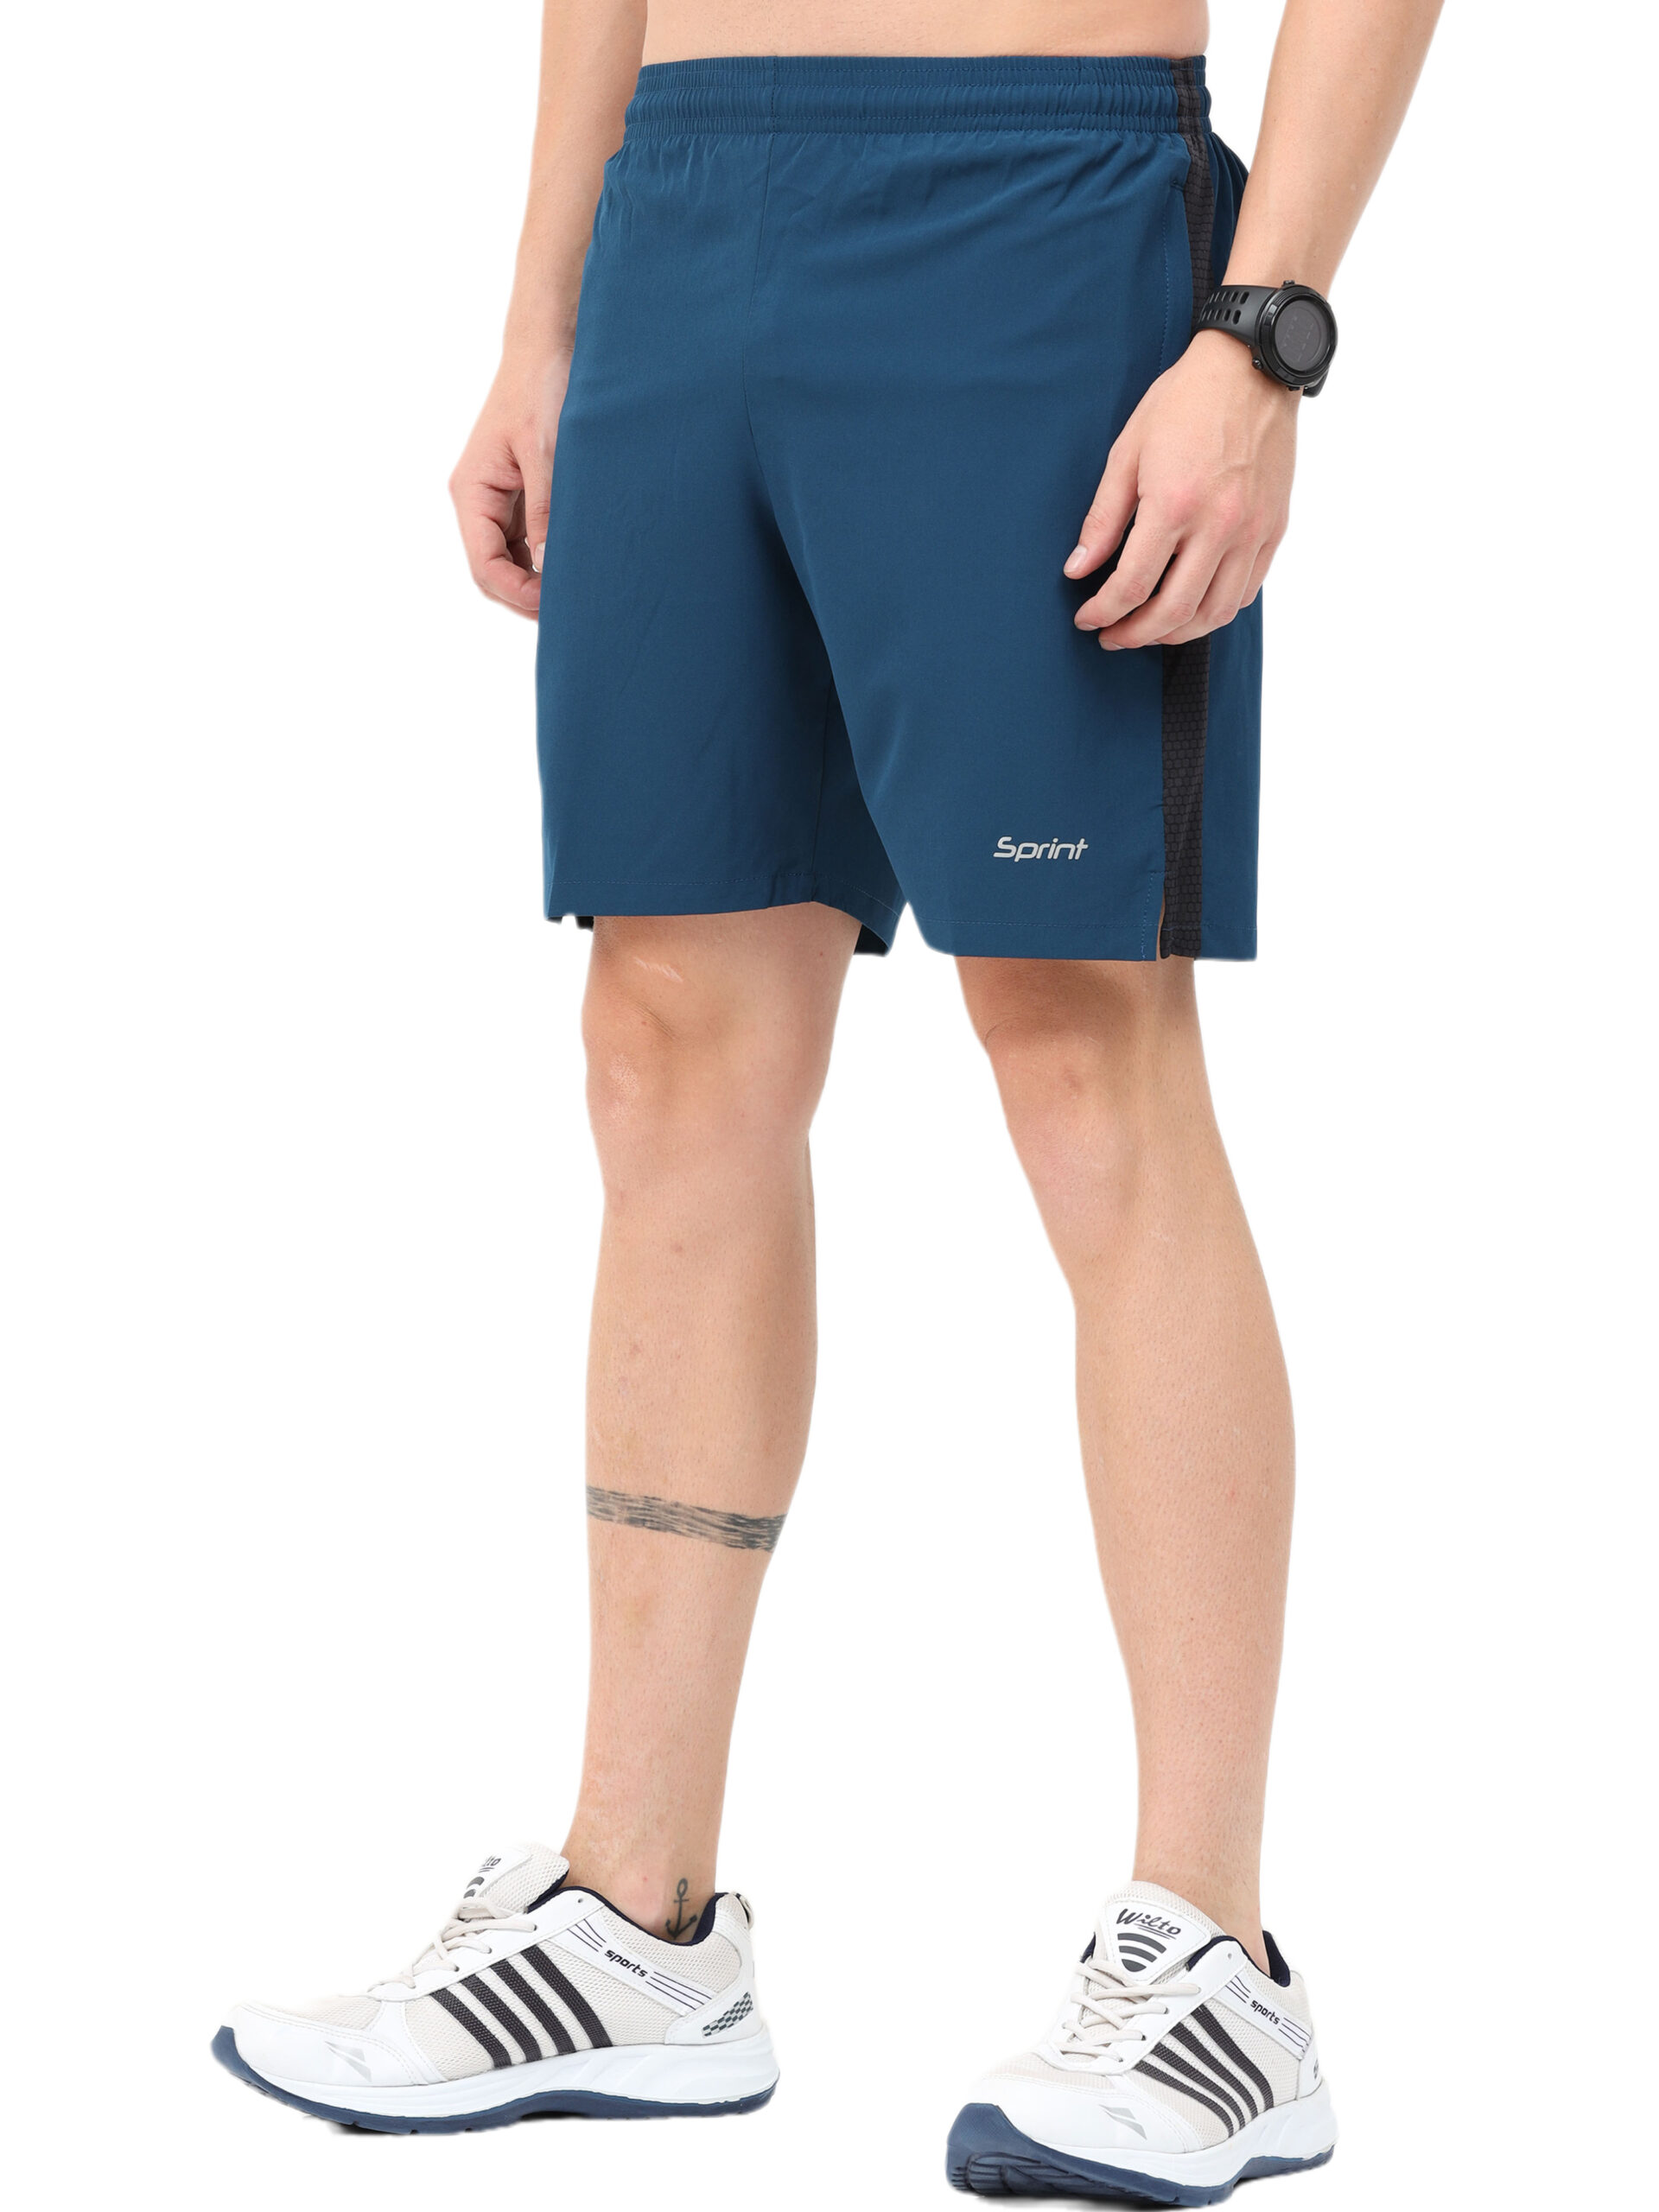 Stylish and Functional Running Shorts by @m.nobes1912